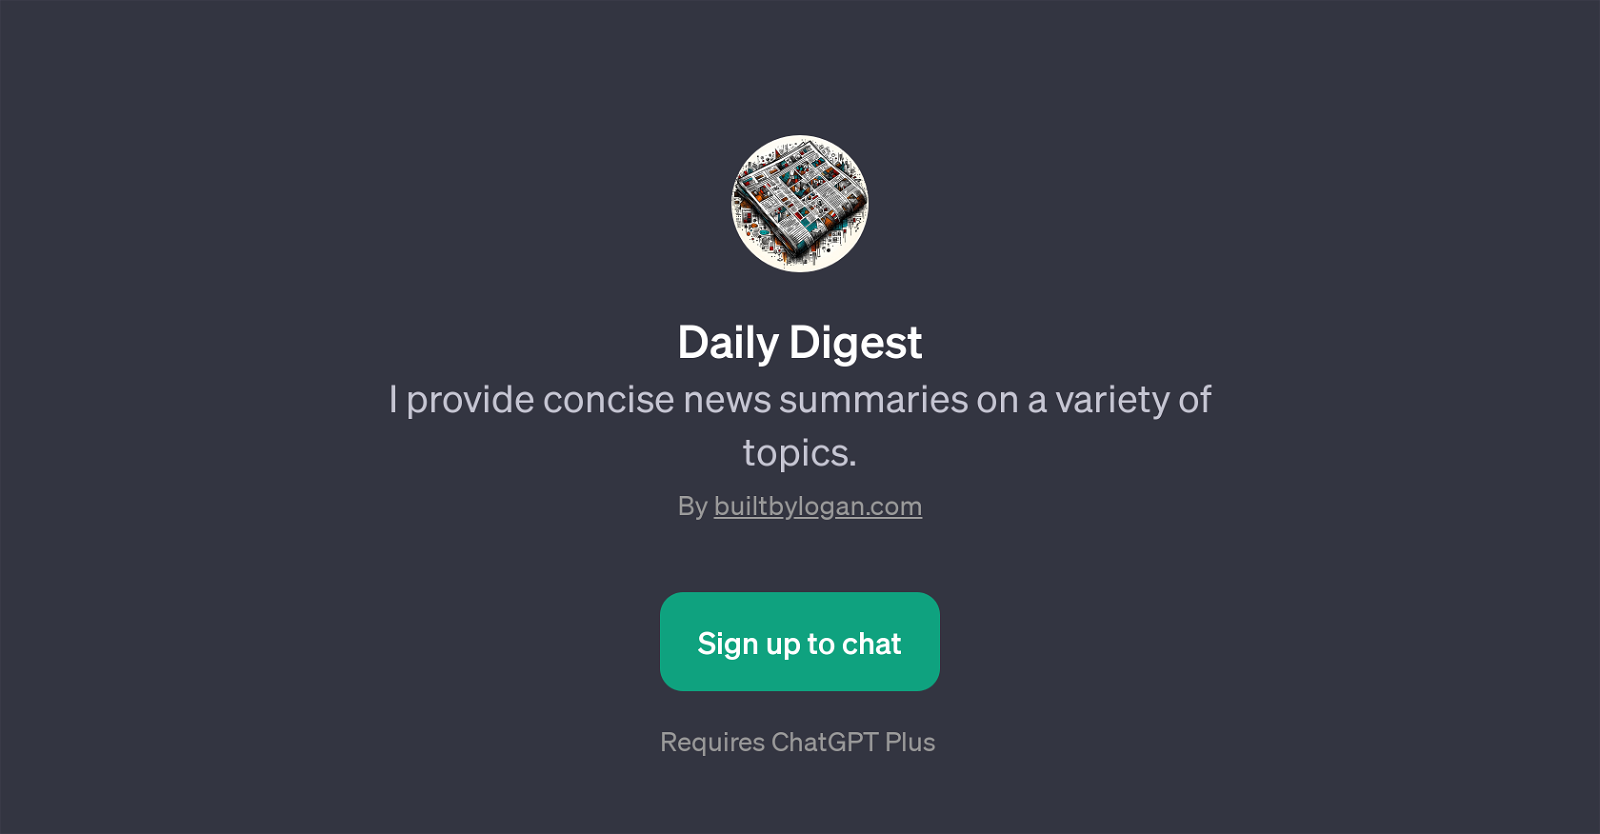 Daily Digest website